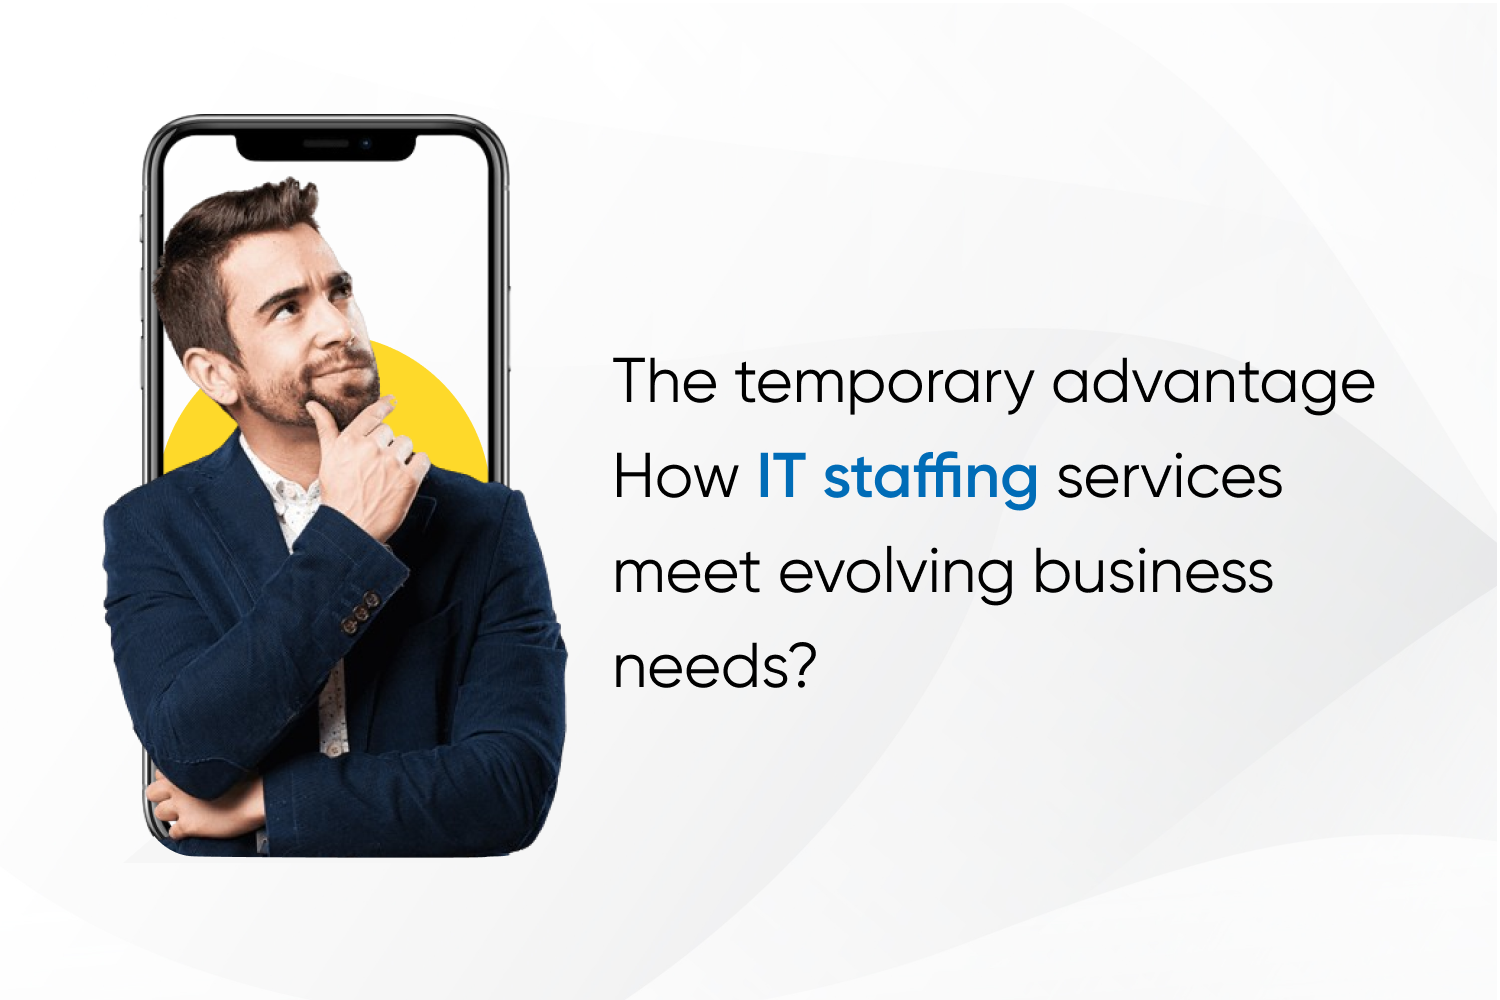 The temporary advantage How IT staffing services meet evolving business needs